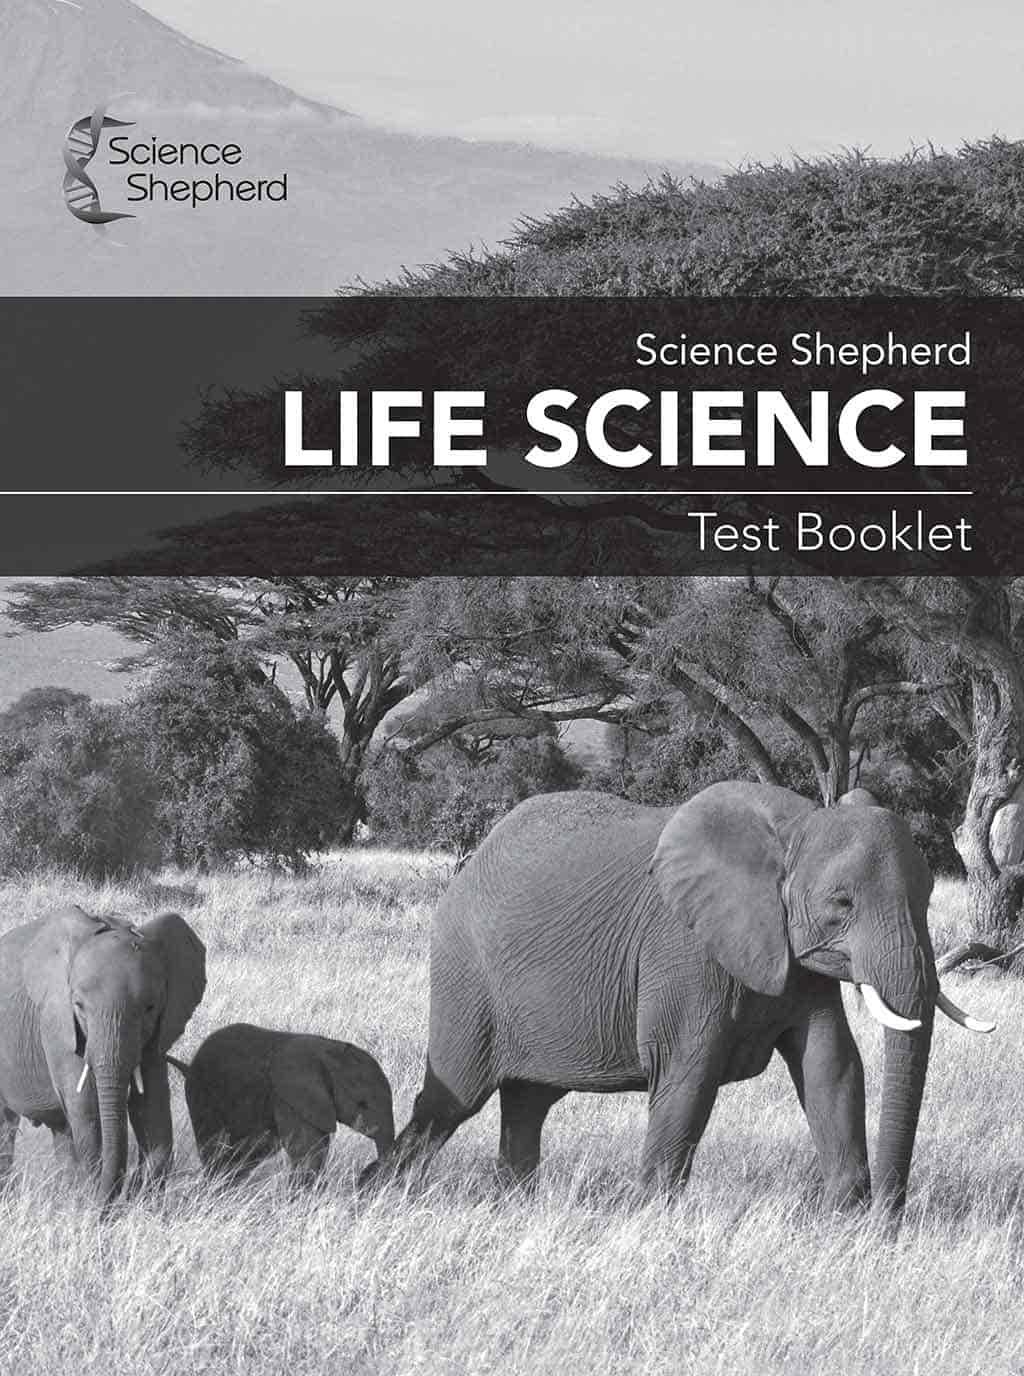 Homeschool 6th grade science test booklet cover of African elephants in grayscale